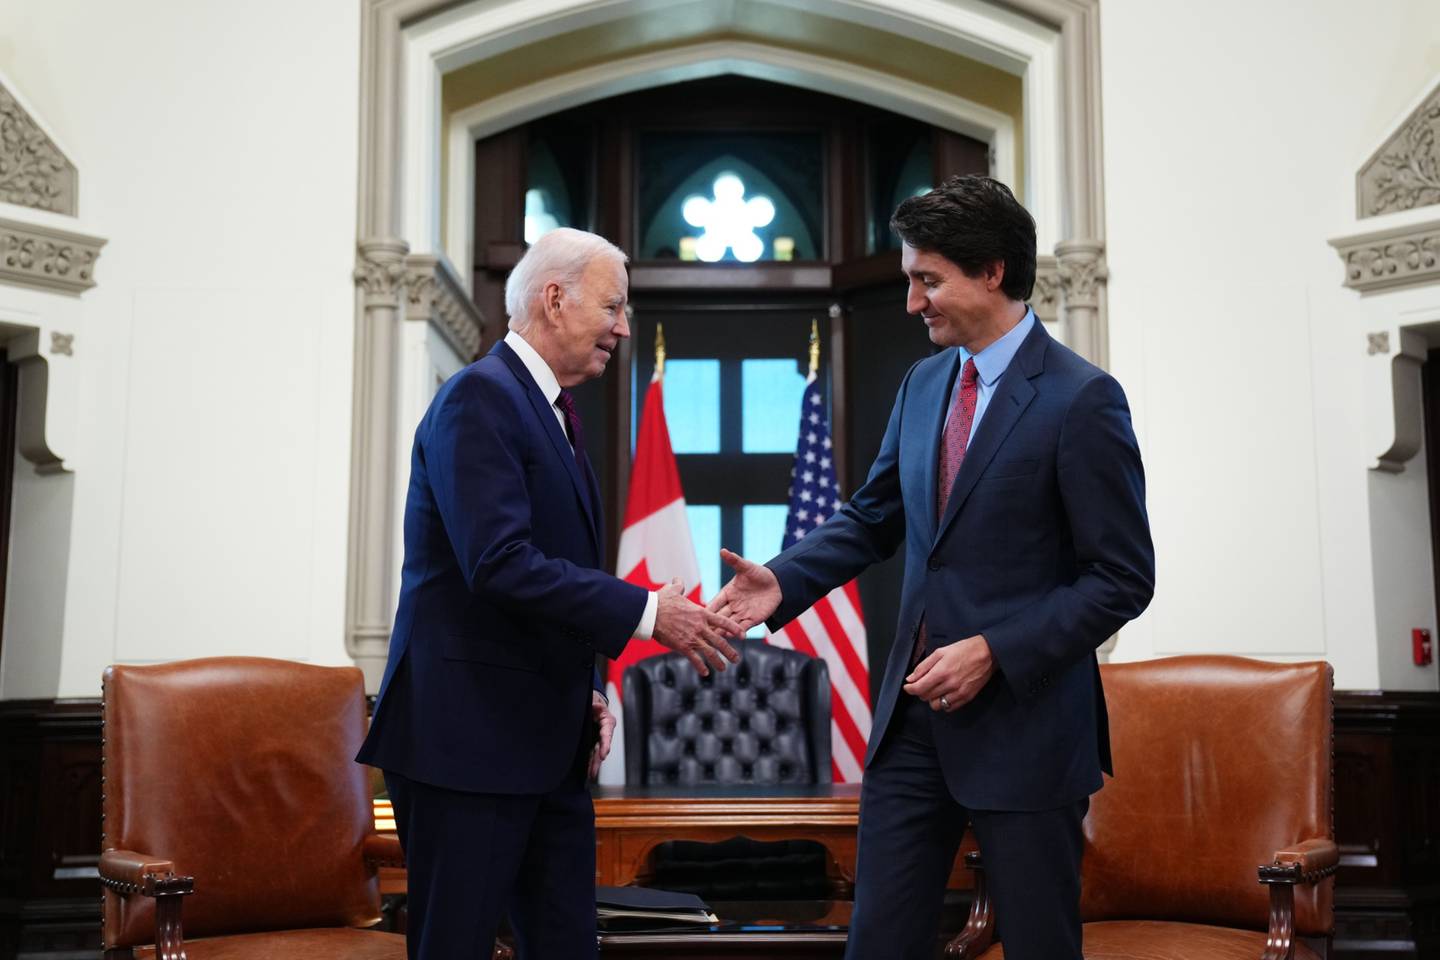 US President Joe Biden, left, prepares to shake hands with Justin Trudeau, Canada's prime minister, ahead of a bilateral meeting on Parliament Hill in Ottawa, Ontario, Canada, on Friday, March 24, 2023. Photographer: Sean Kilpatrick/Canadian Press/Bloomberg